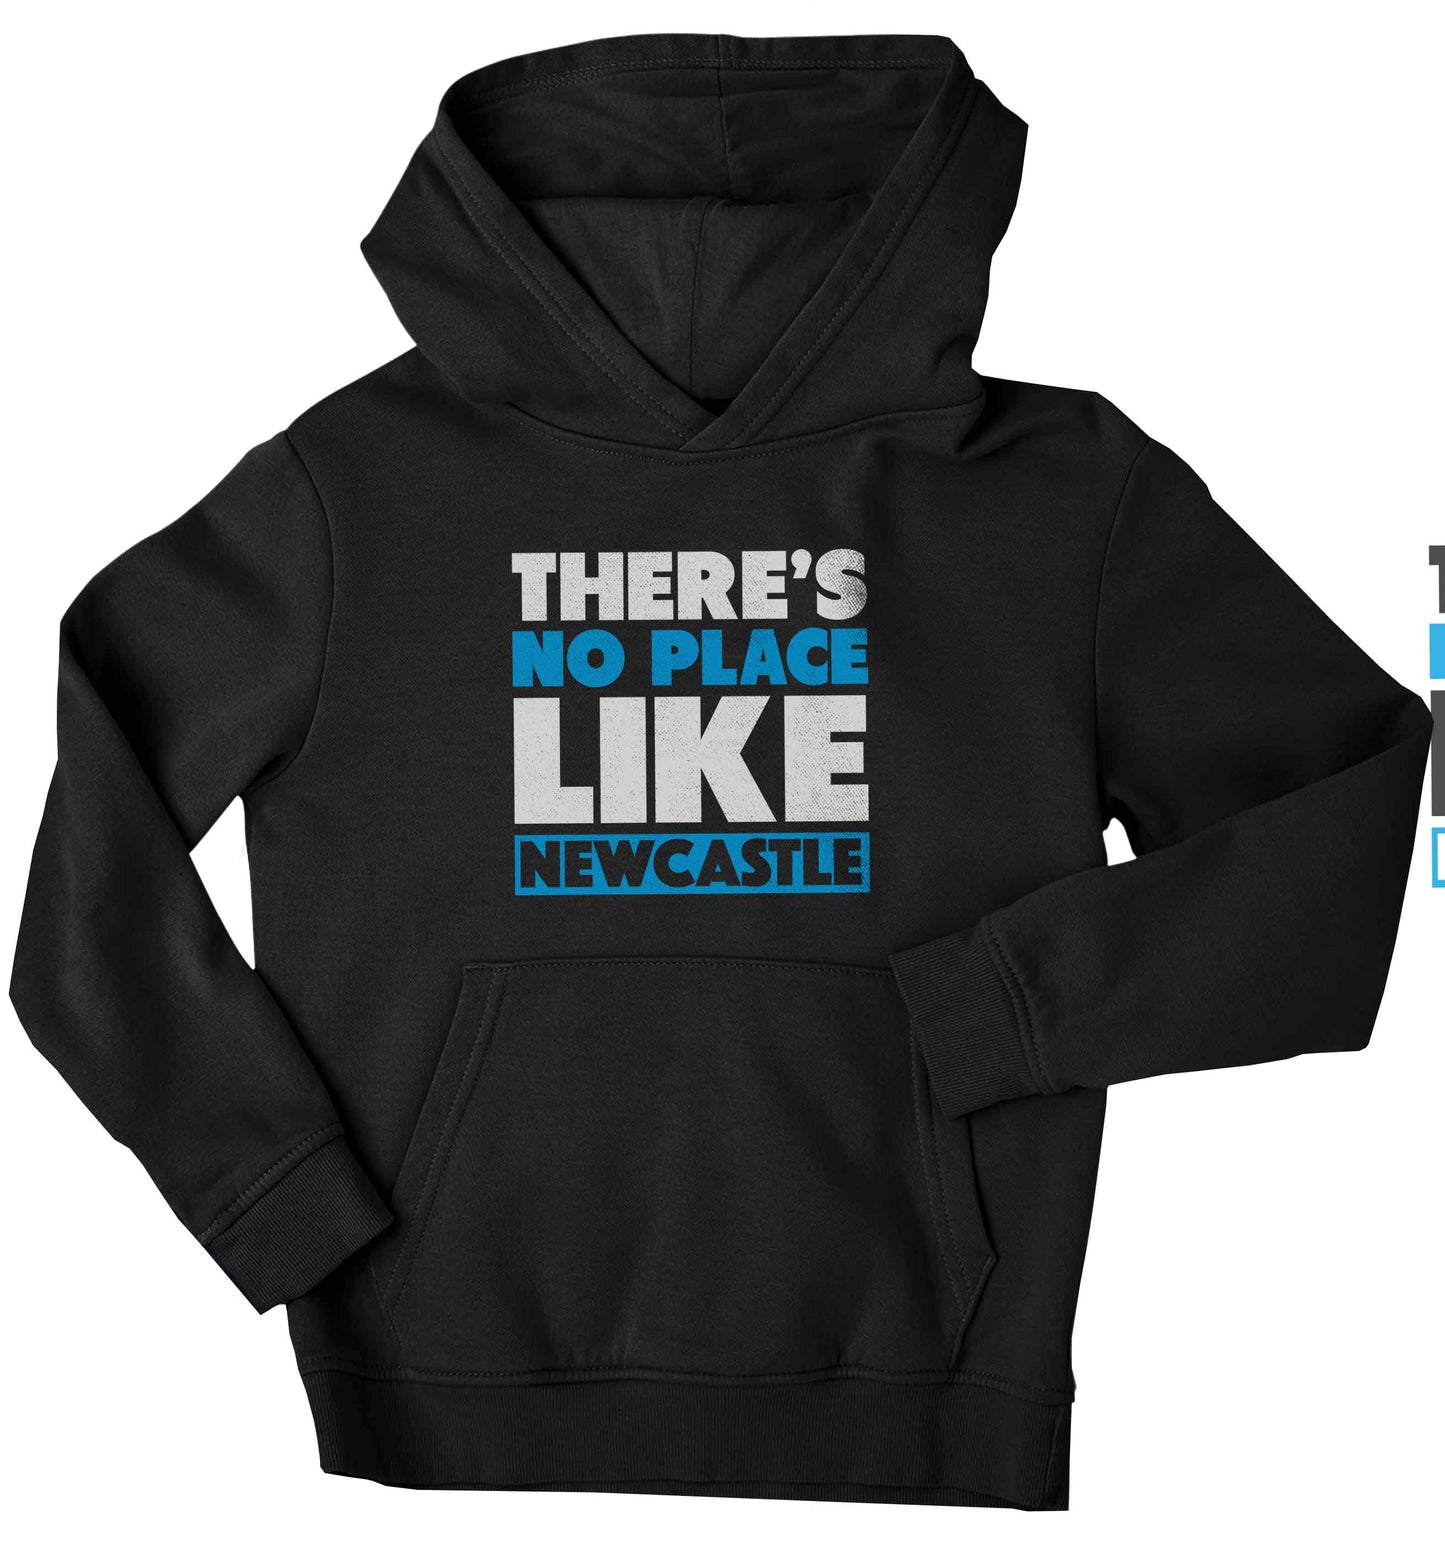 There's no place like Newcastle children's black hoodie 12-13 Years